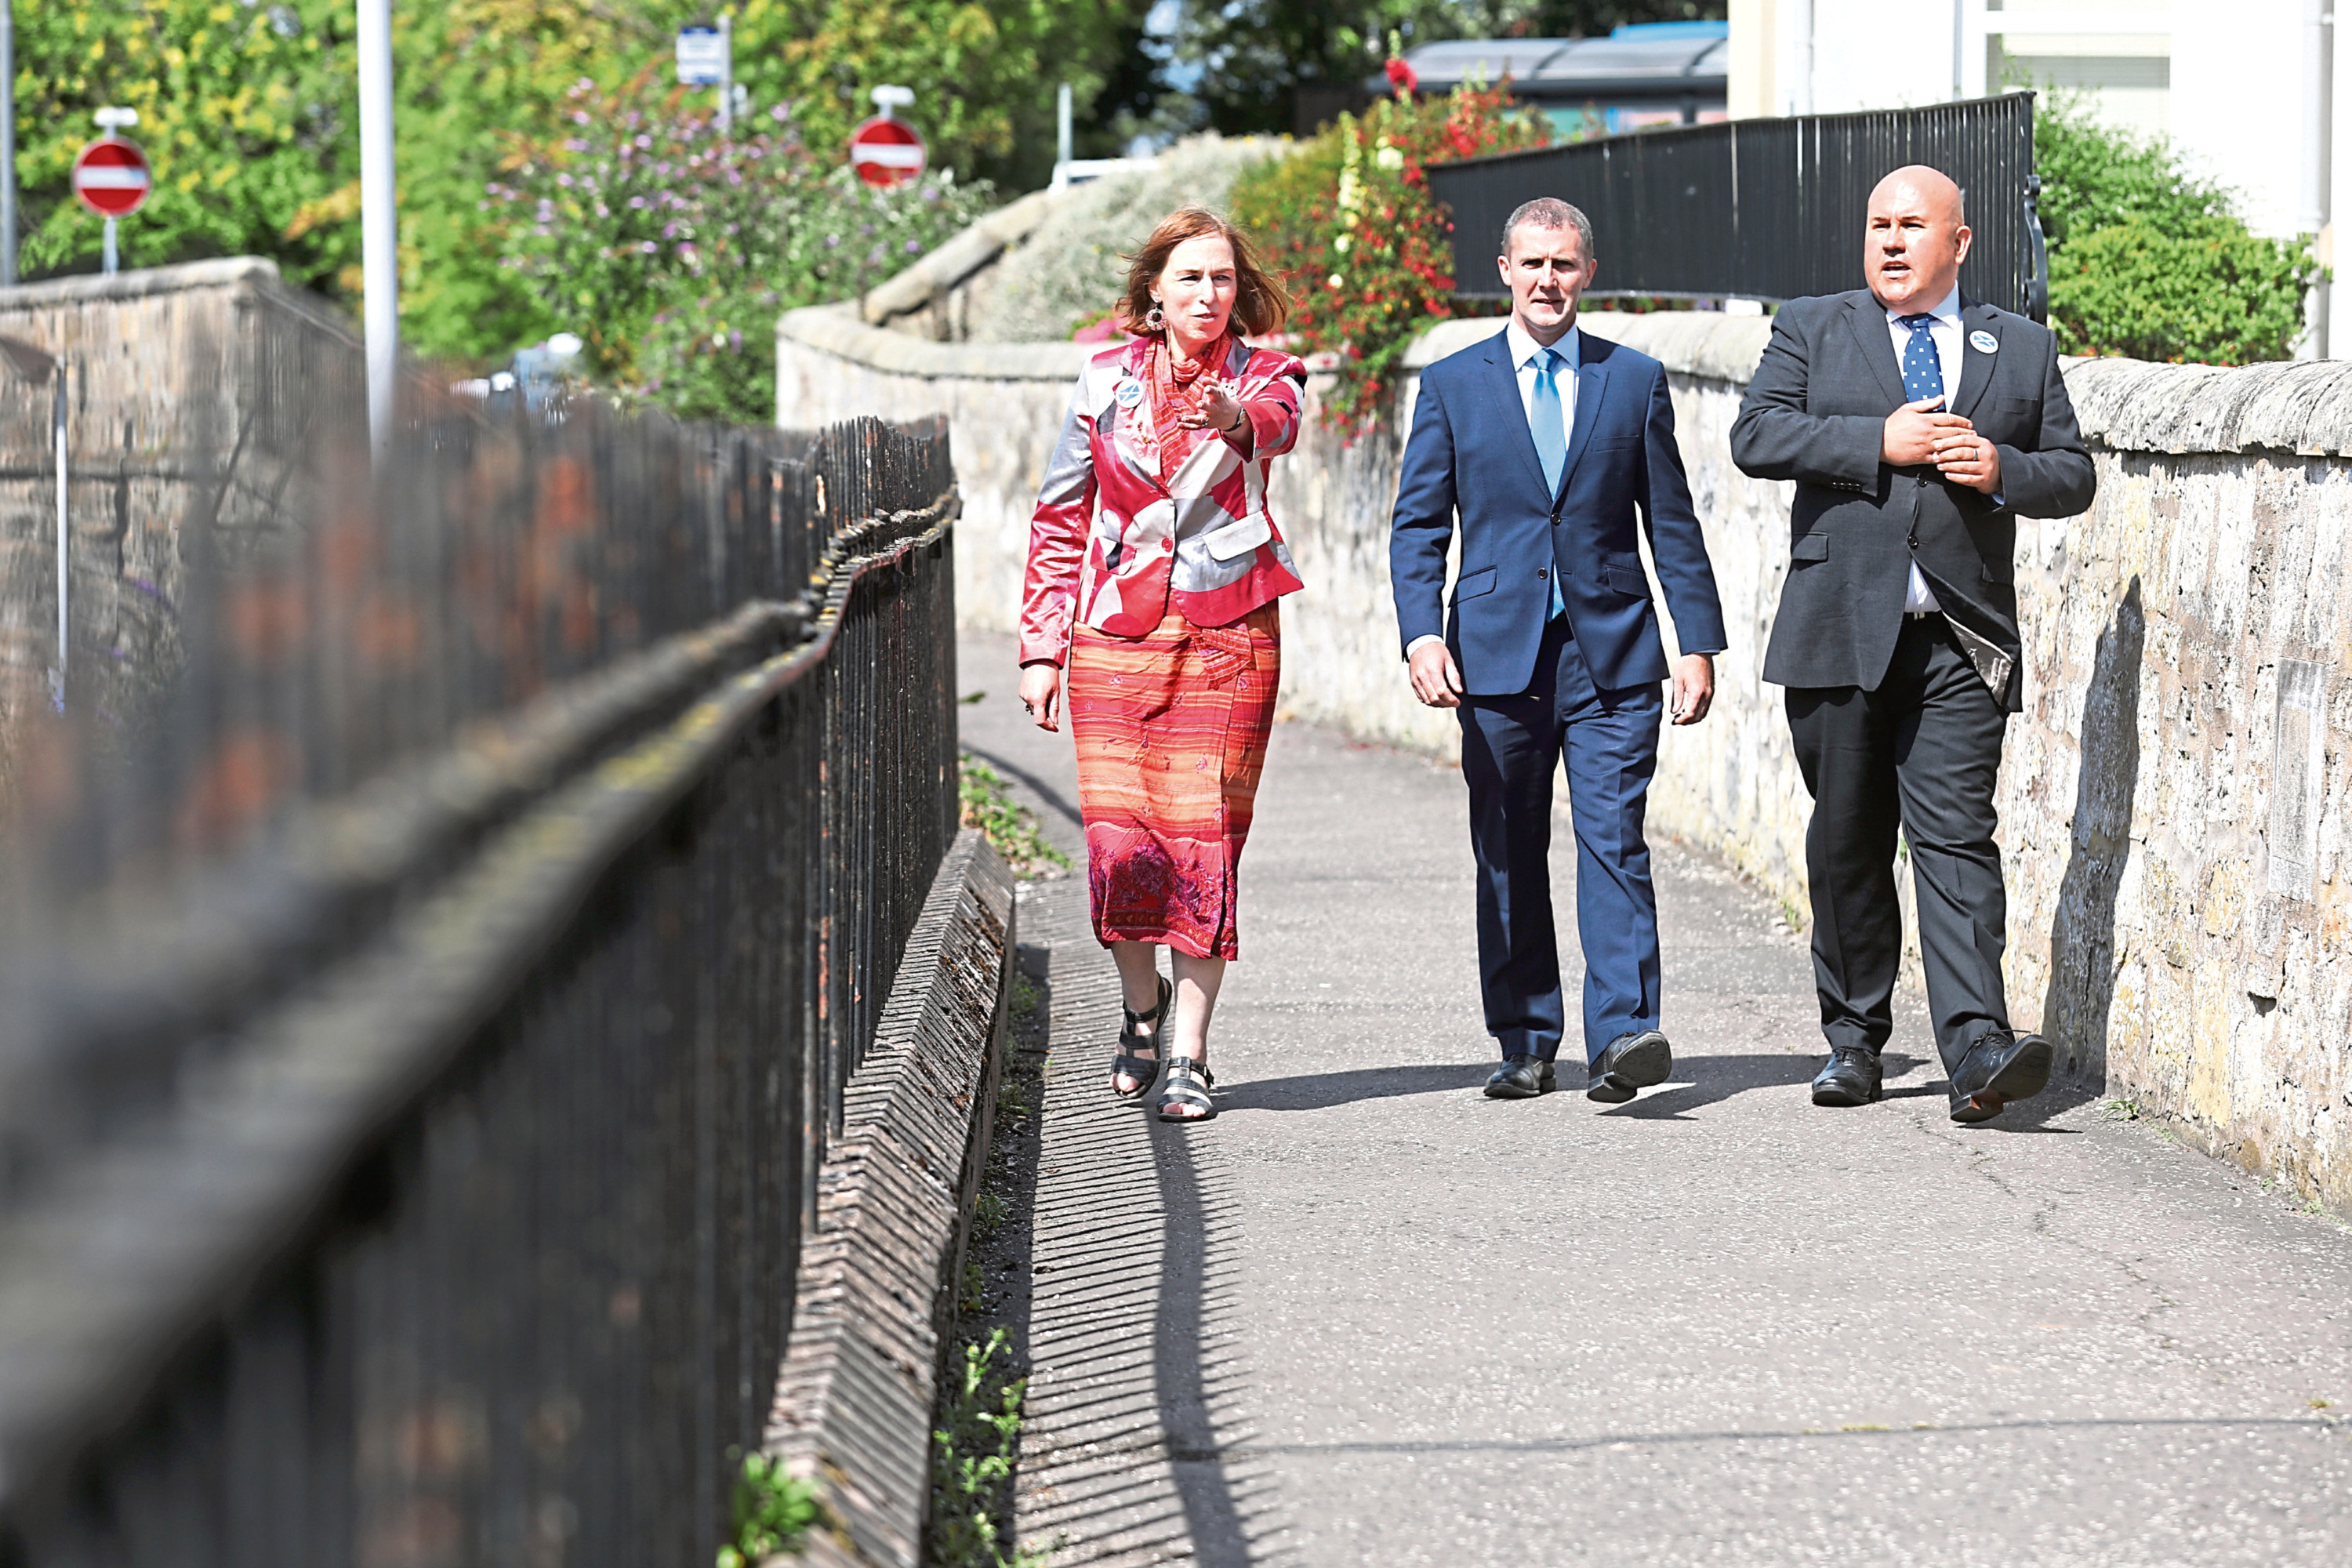 StARLink members Jane Ann Liston and Dita Stanis-Traken with Transport Secretary Michael Matheson (centre) during a visit to the site of the old St Andrews rail station earlier this year